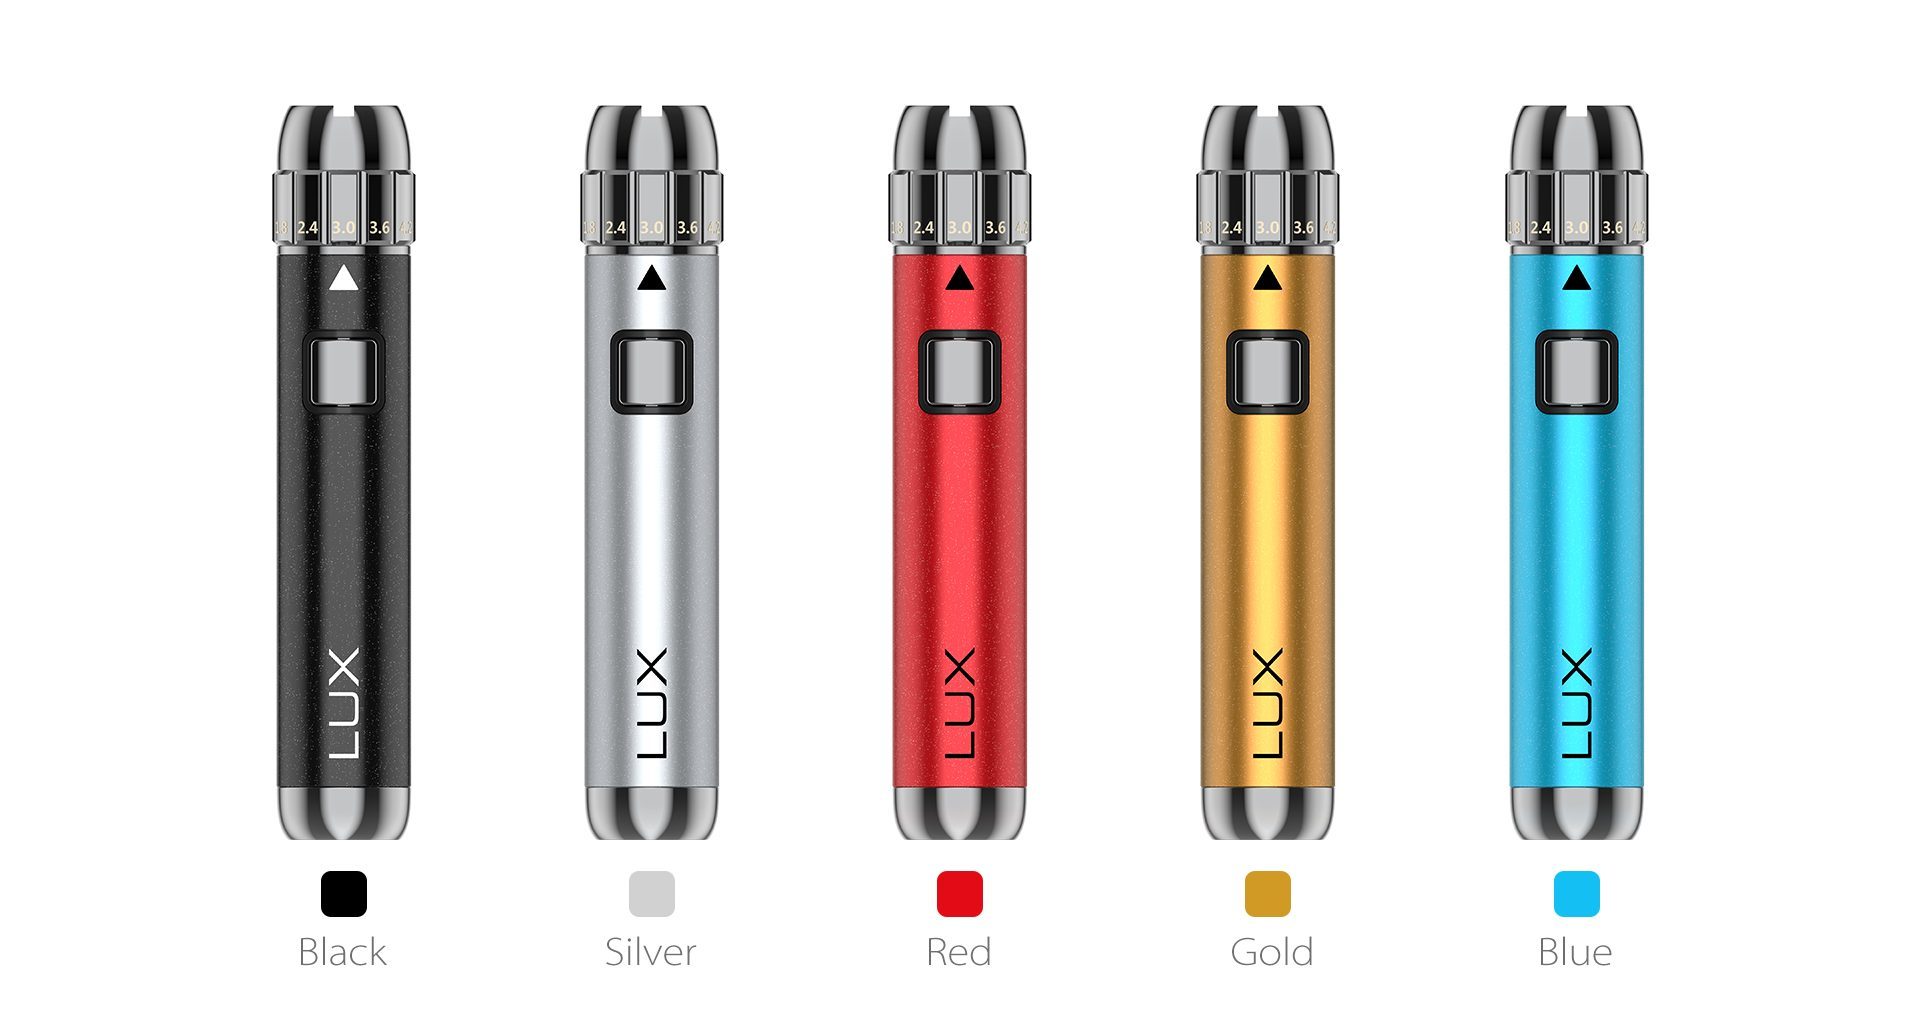 Yocan LUX 510 Threaded Vape Pen Battery comes with 5 colors.